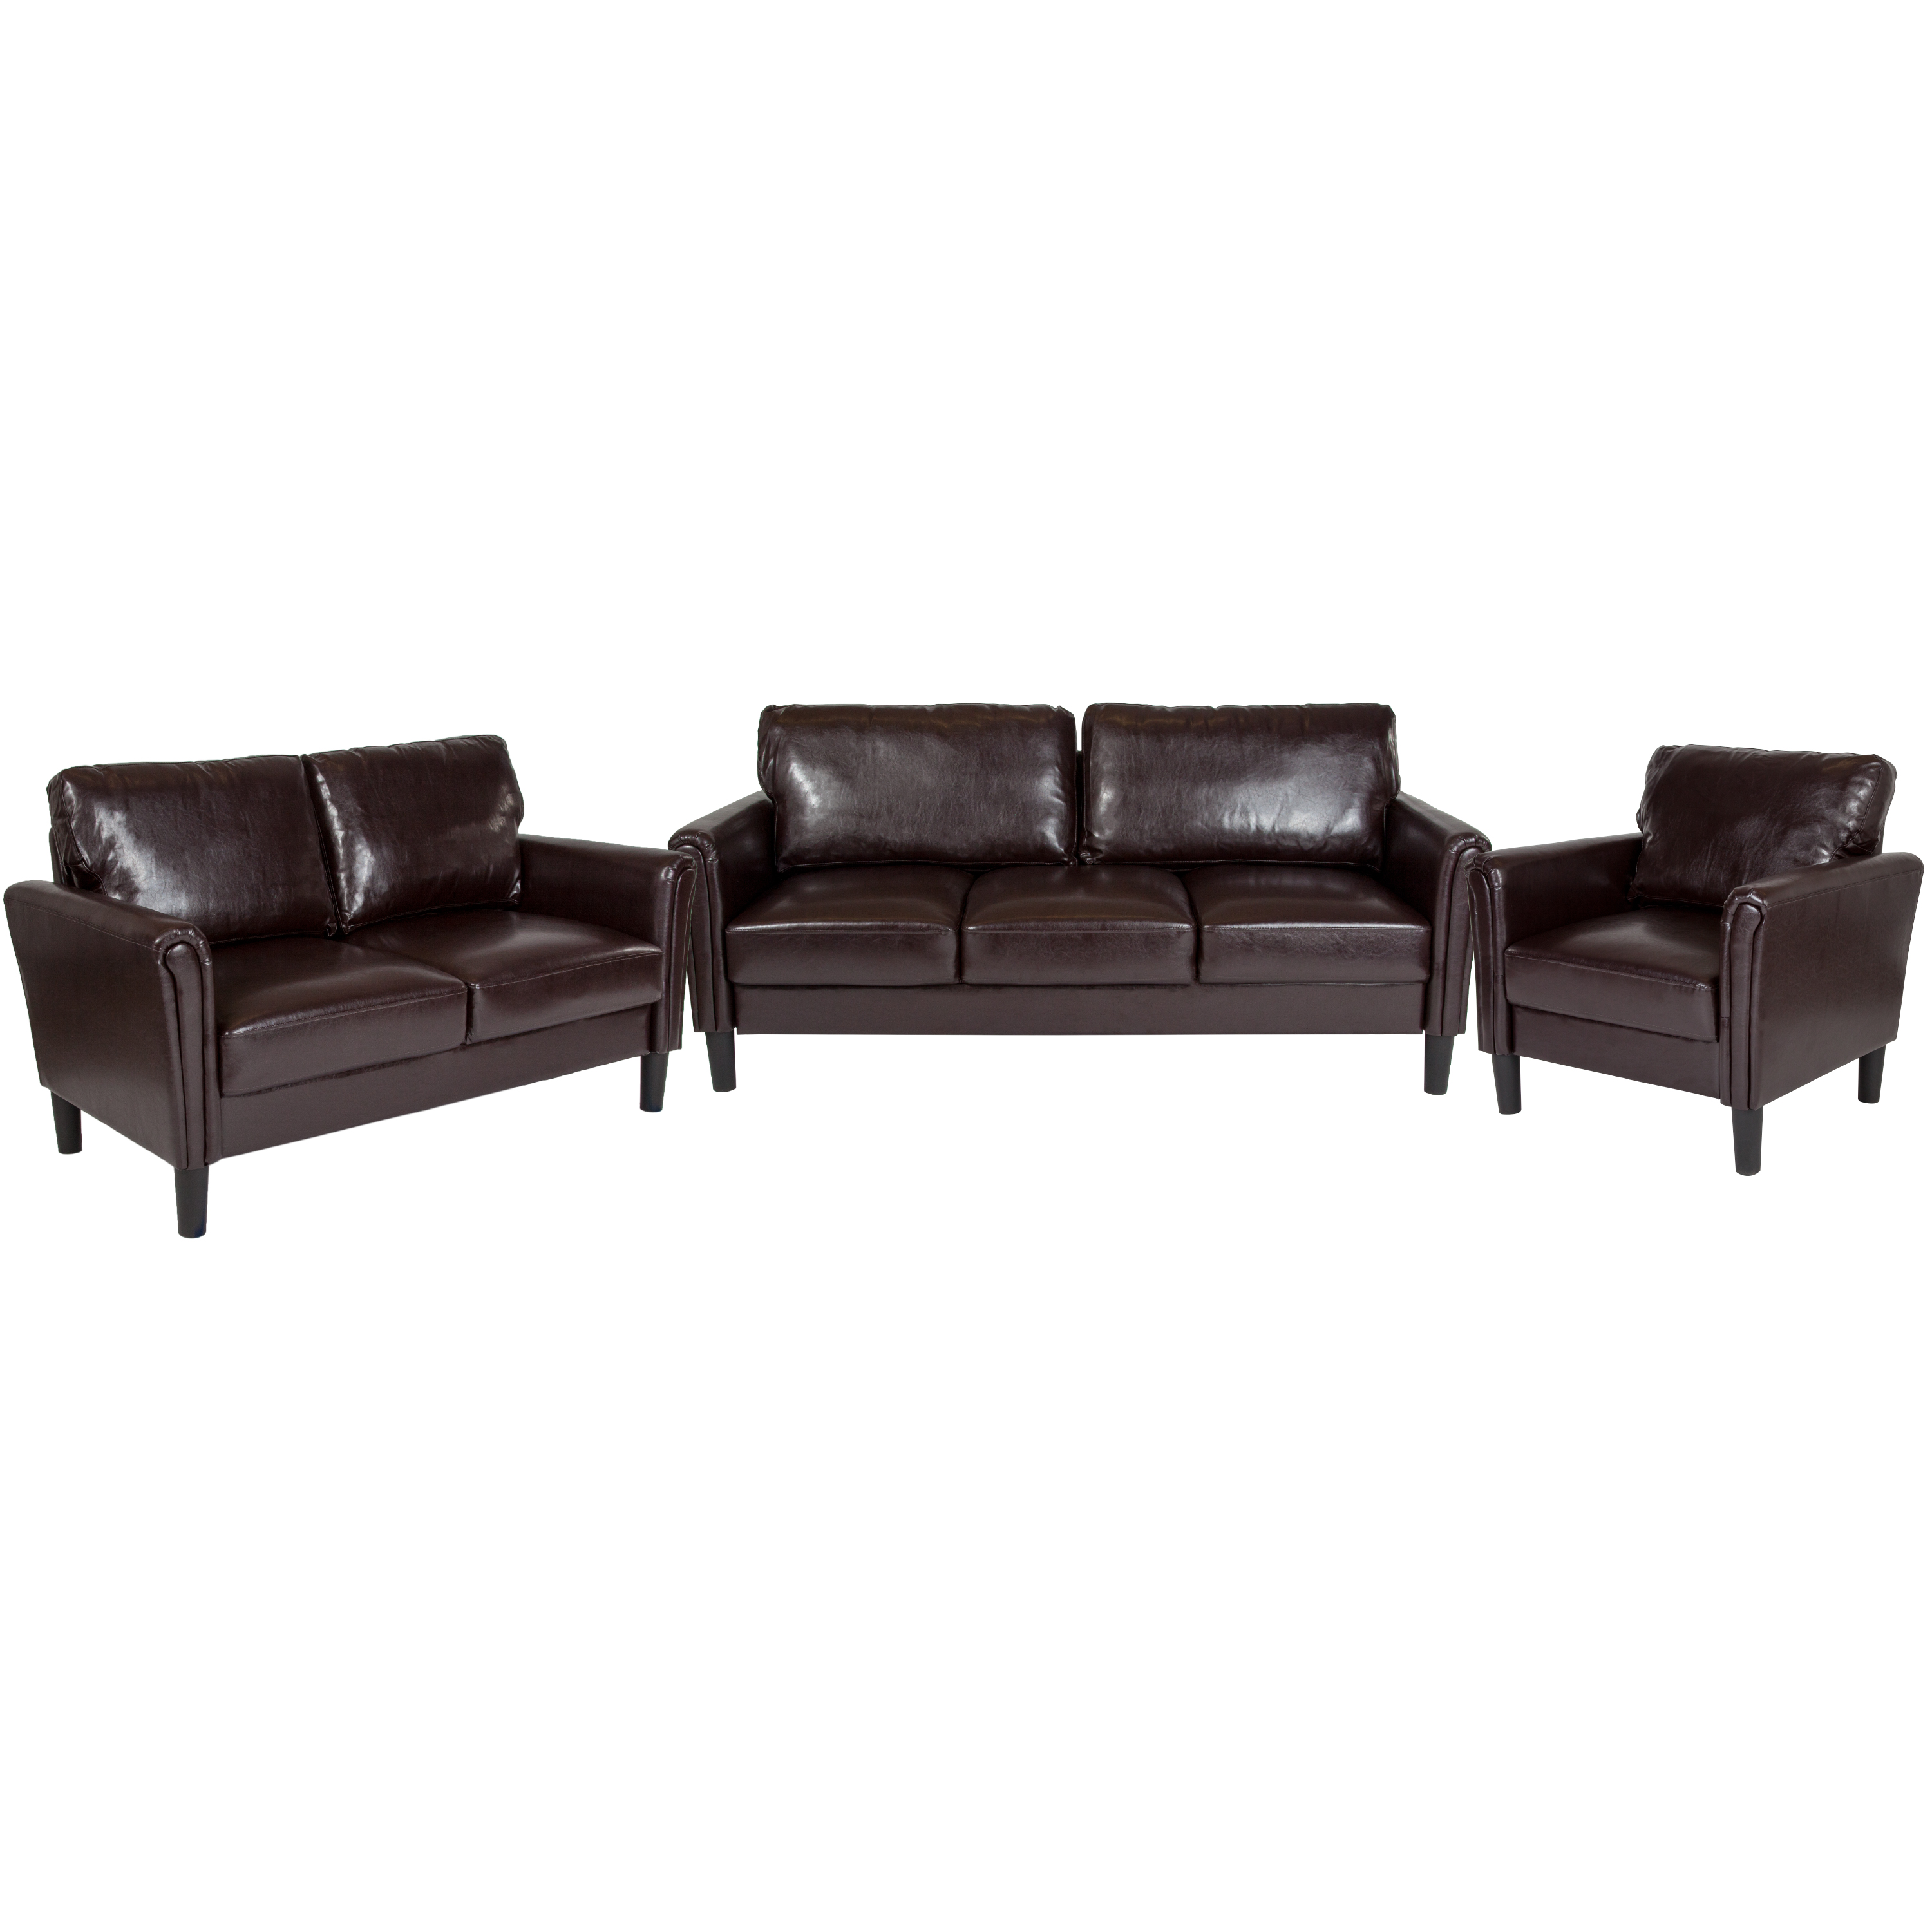 Flash Furniture Bari 3 Piece Upholstered Set in Brown LeatherSoft - image 1 of 2